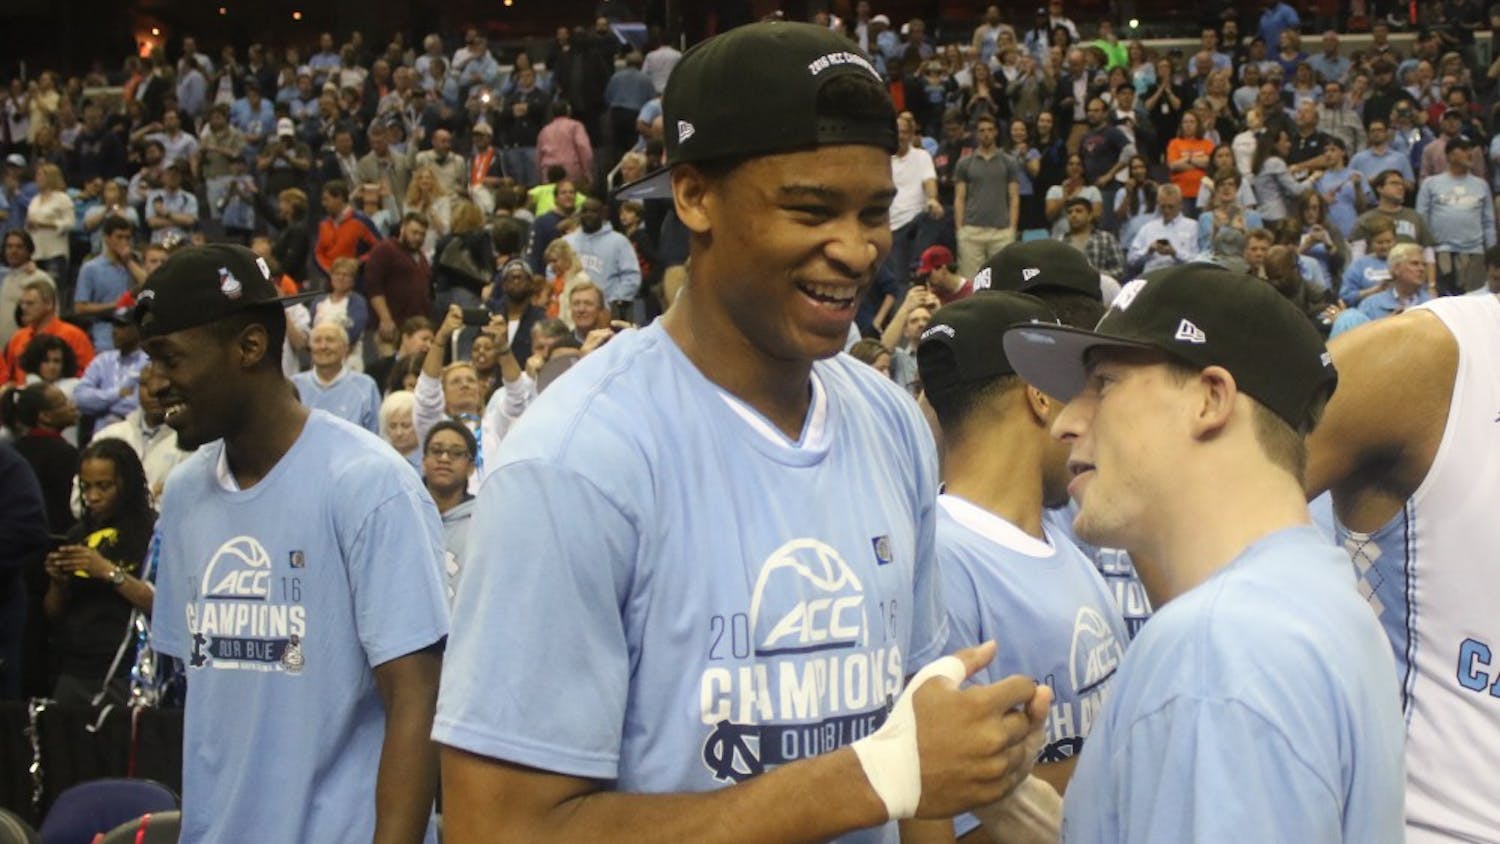 North Carolina forward Isaiah Hicks (left) greets teammate Stilman White (right) after the UNC men's basketball team defeated Virginia 61-57 in the ACC Championship on Saturday.